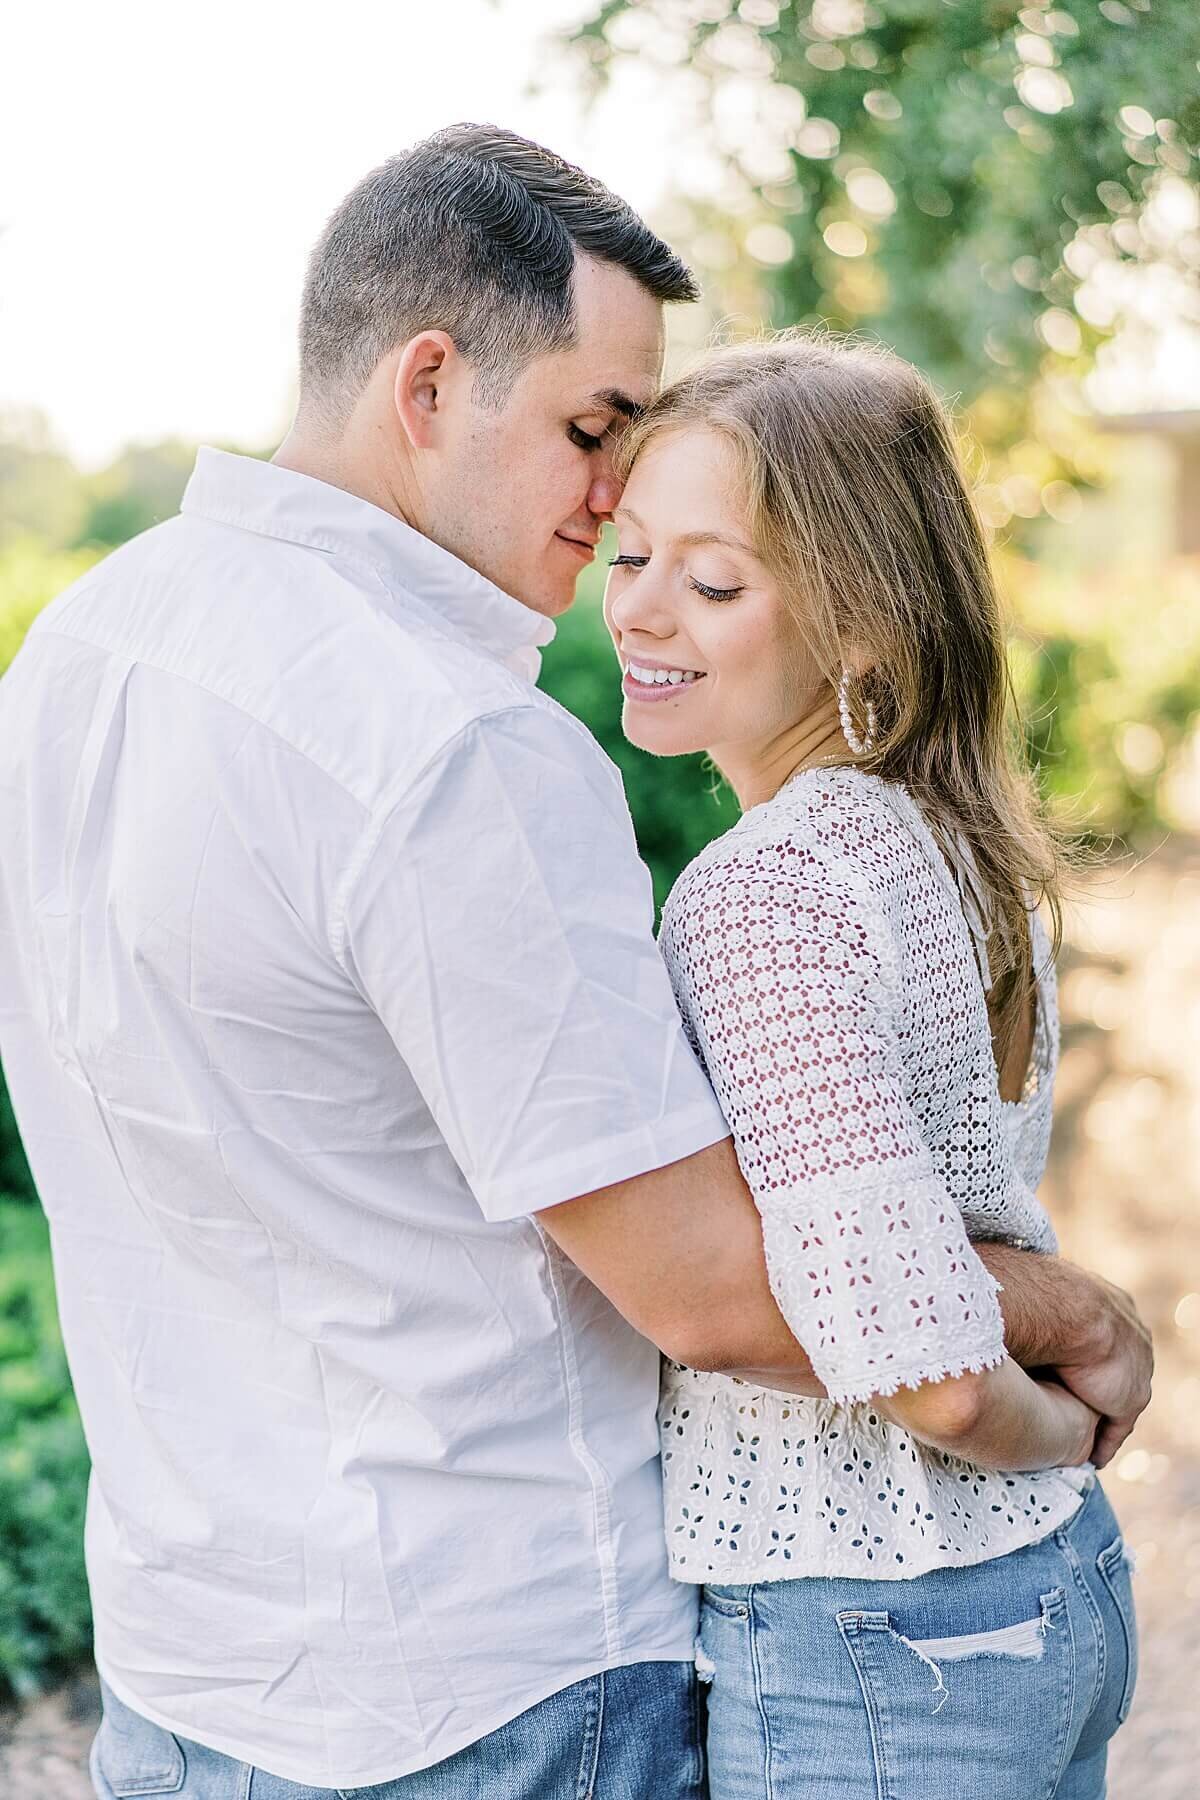 McGovern-Centennial-Gardens-Hermann-Park-Engagement-Session-Alicia-Yarrish-Photography_0018